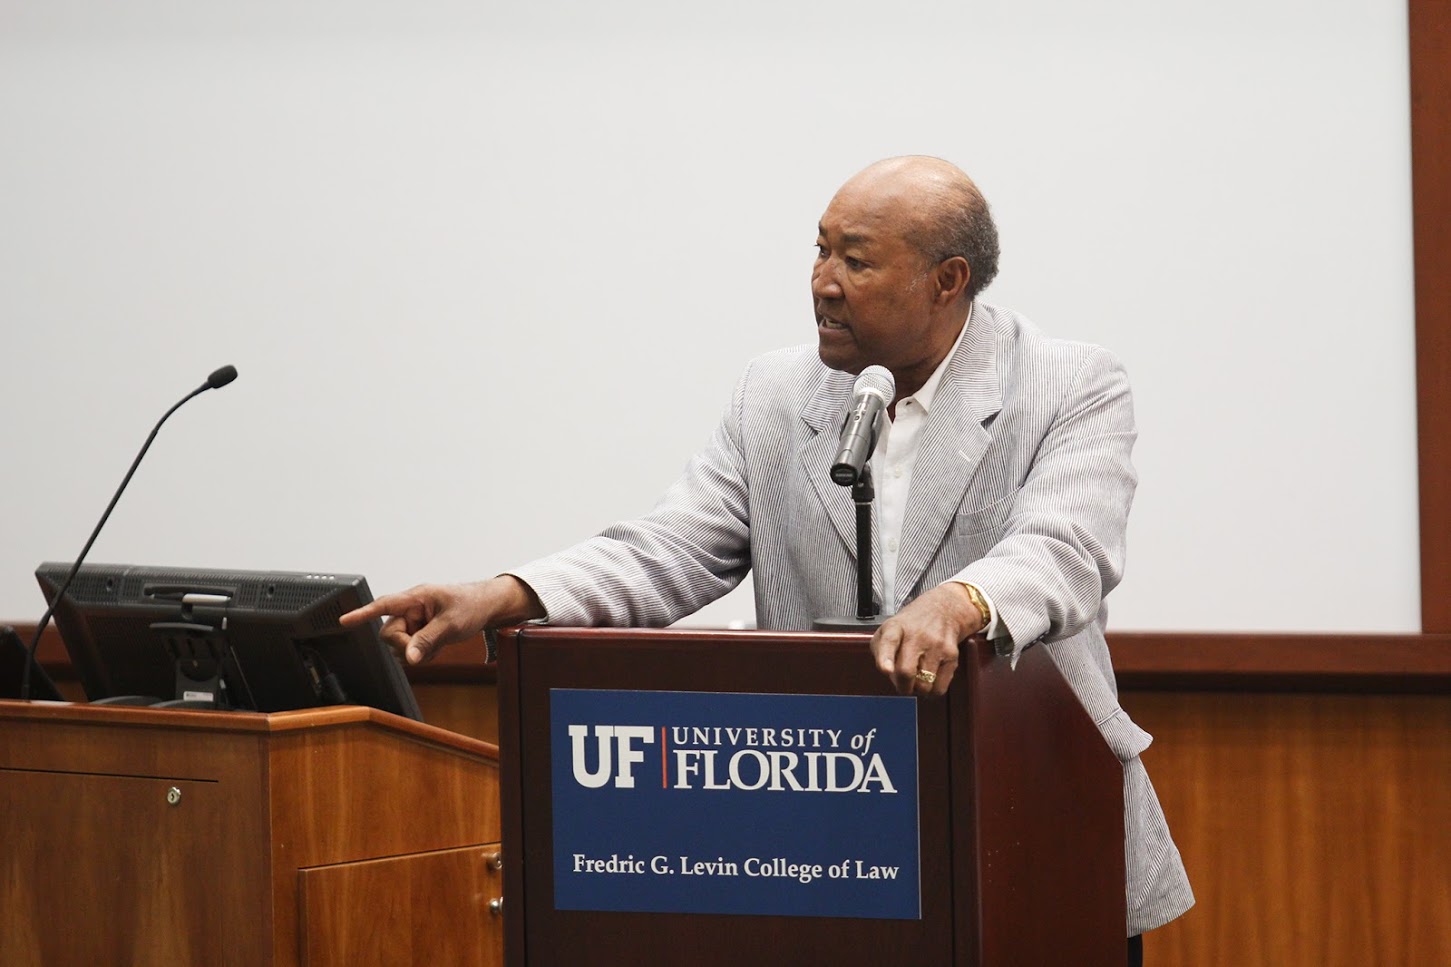 Remembering W. George Allen, UF’s first African American graduate